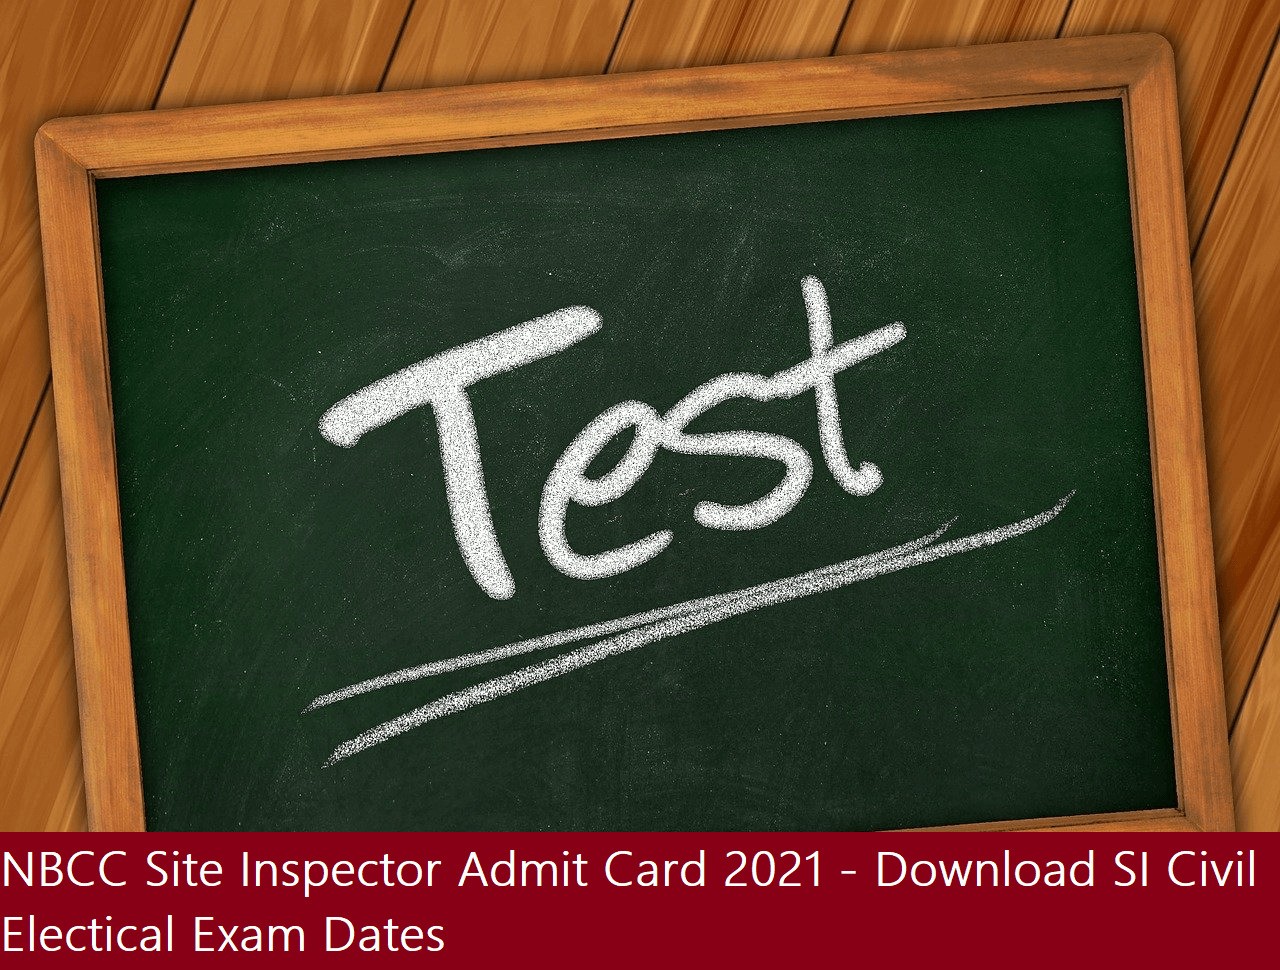 NBCC Site Inspector Admit Card